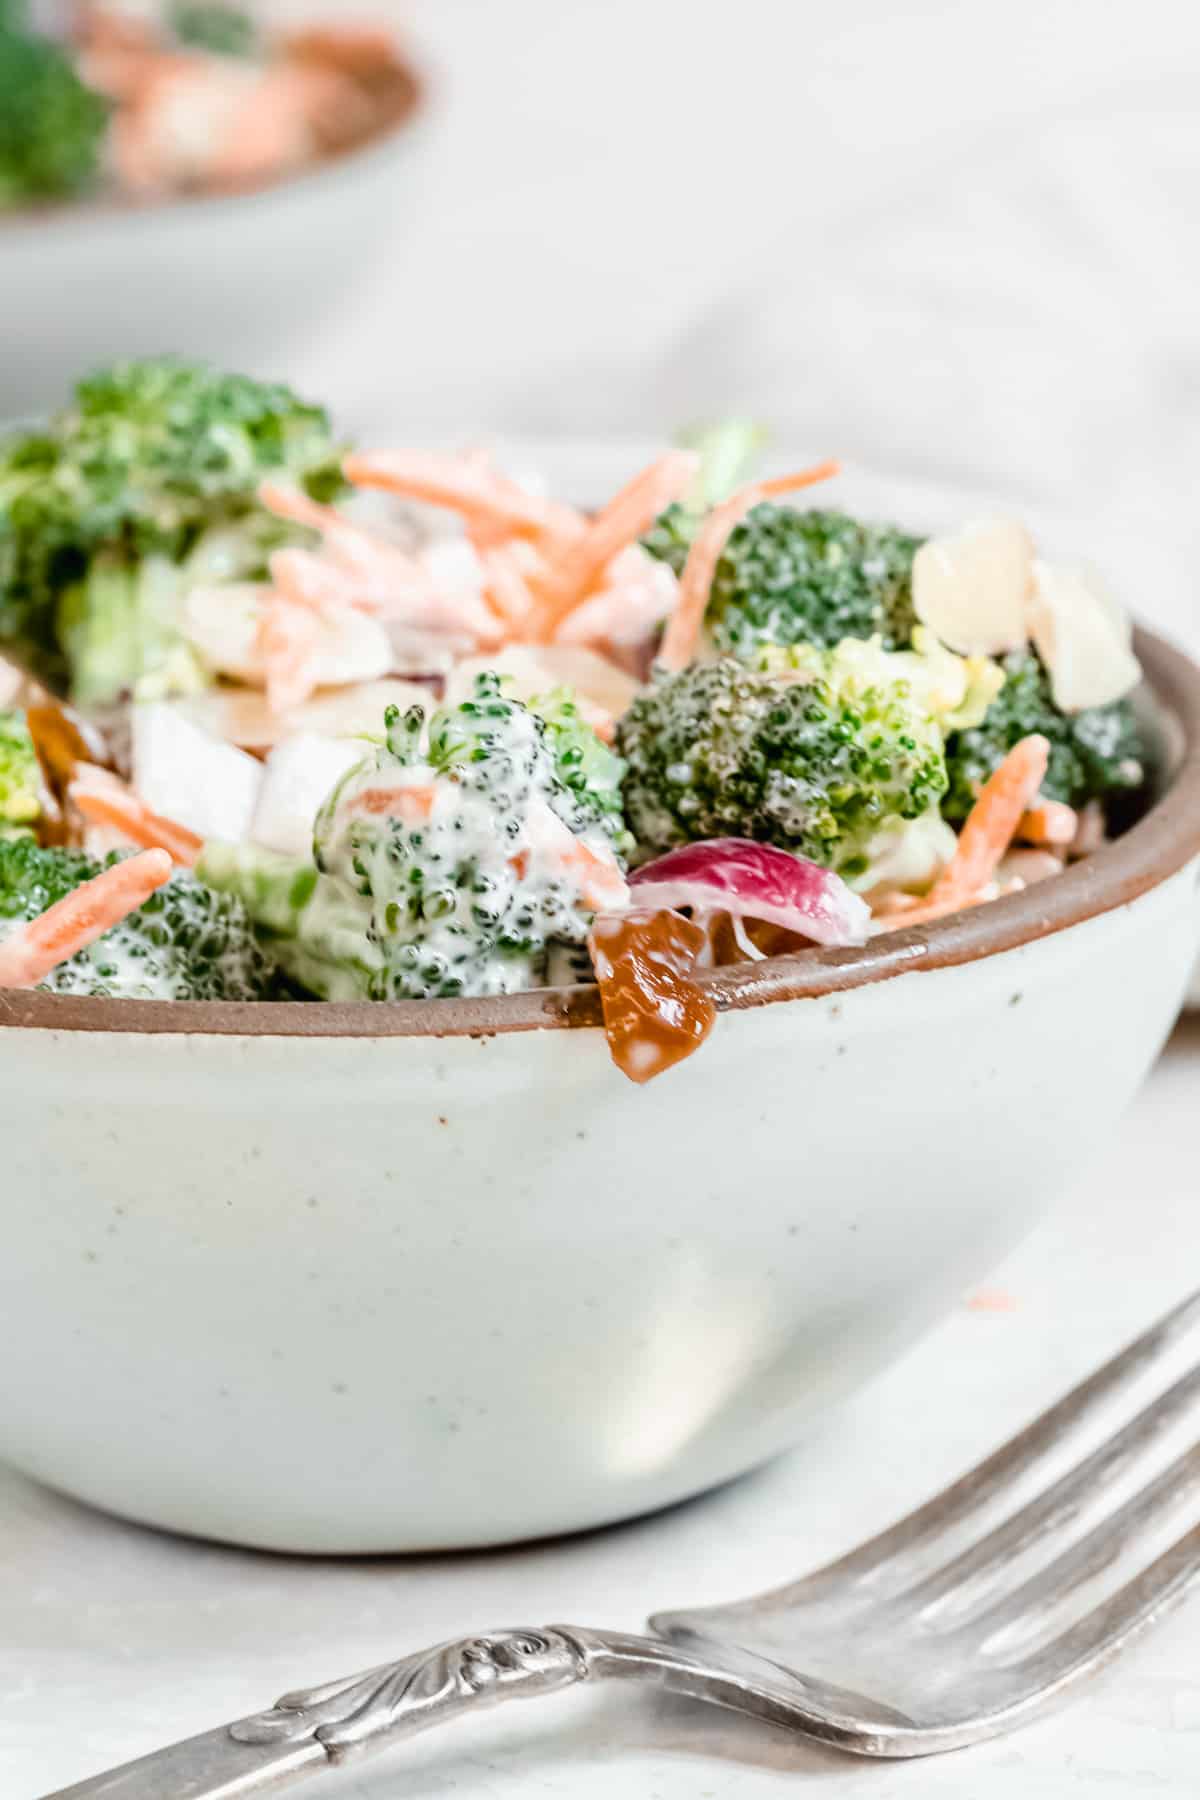 Ceramic bowl with broccoli and carrot  mixture.